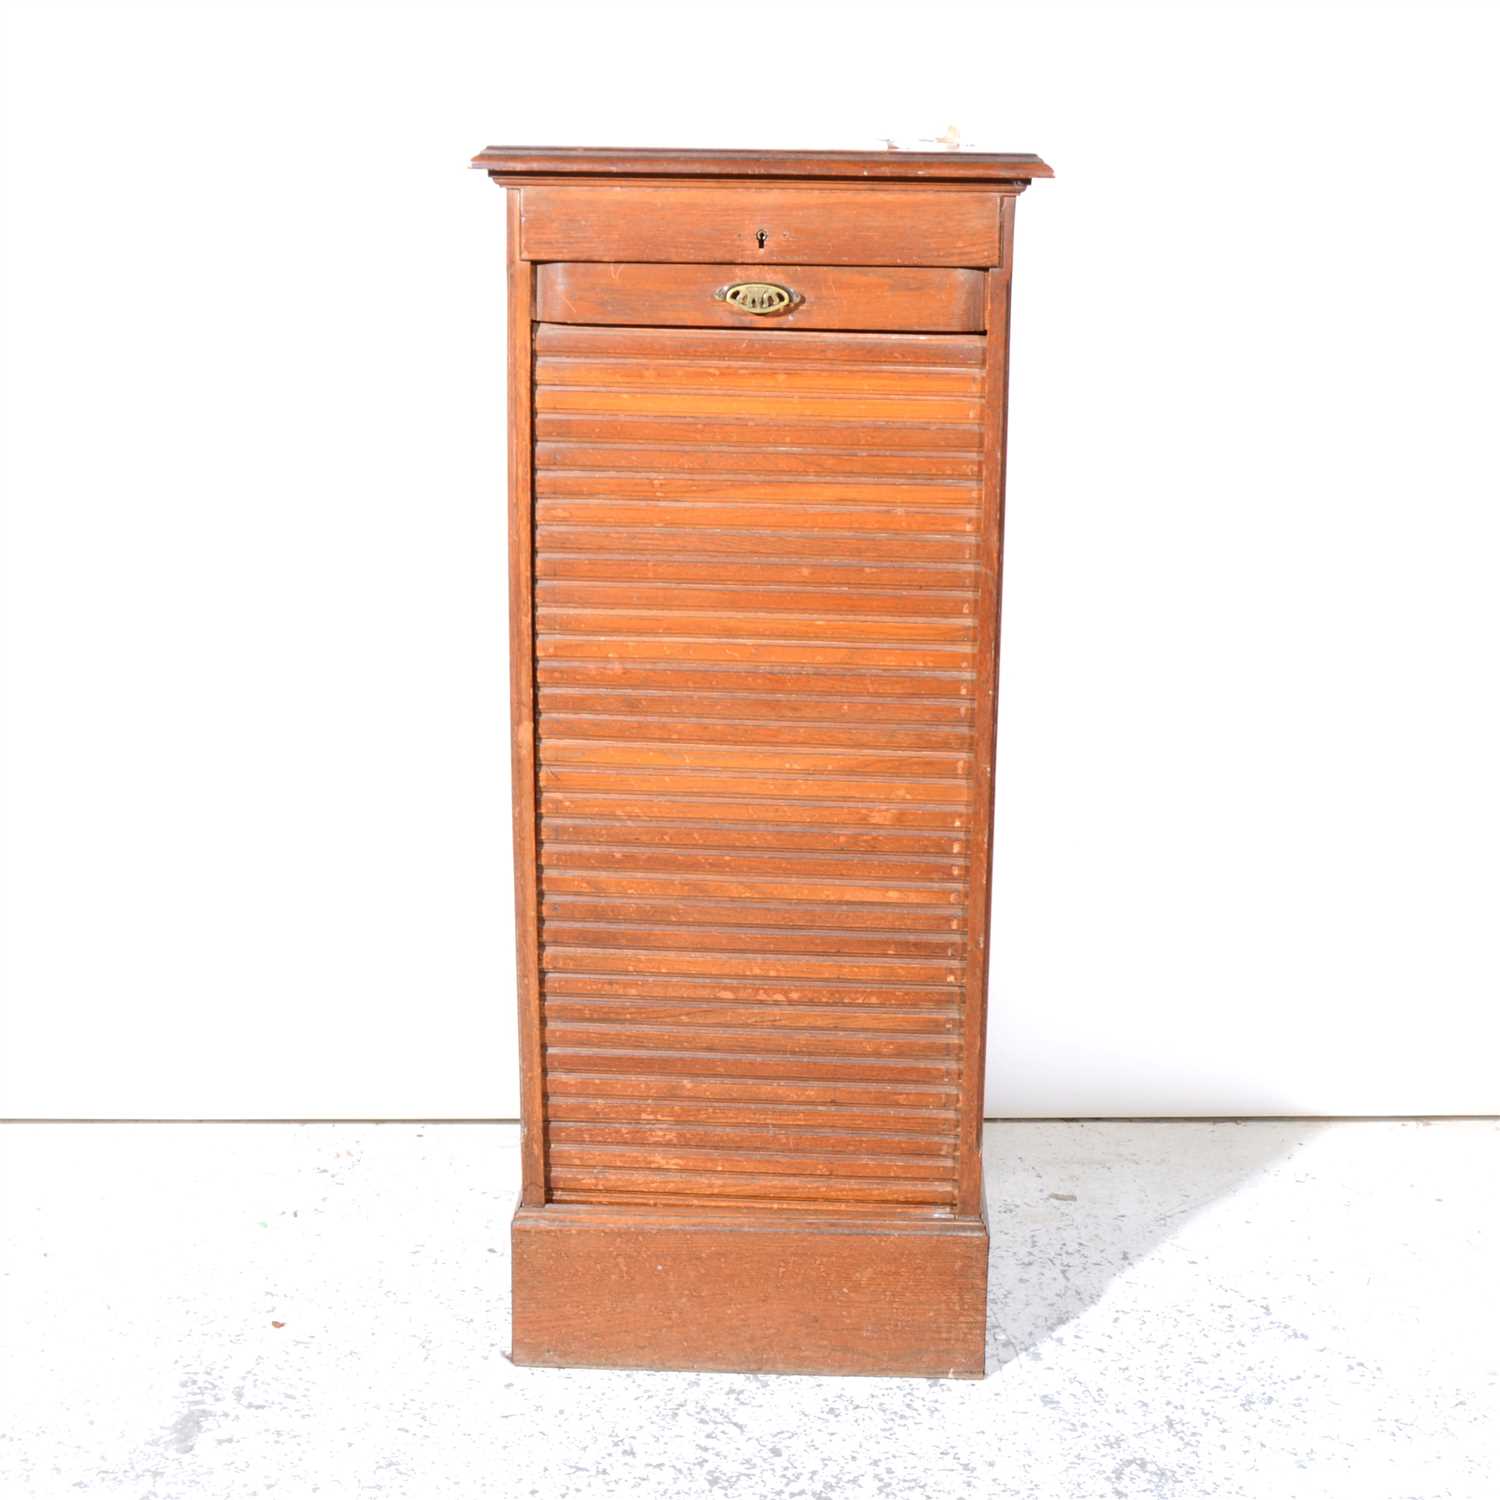 Lot 383 - Oak and stained wood tambour front filing cabinet.